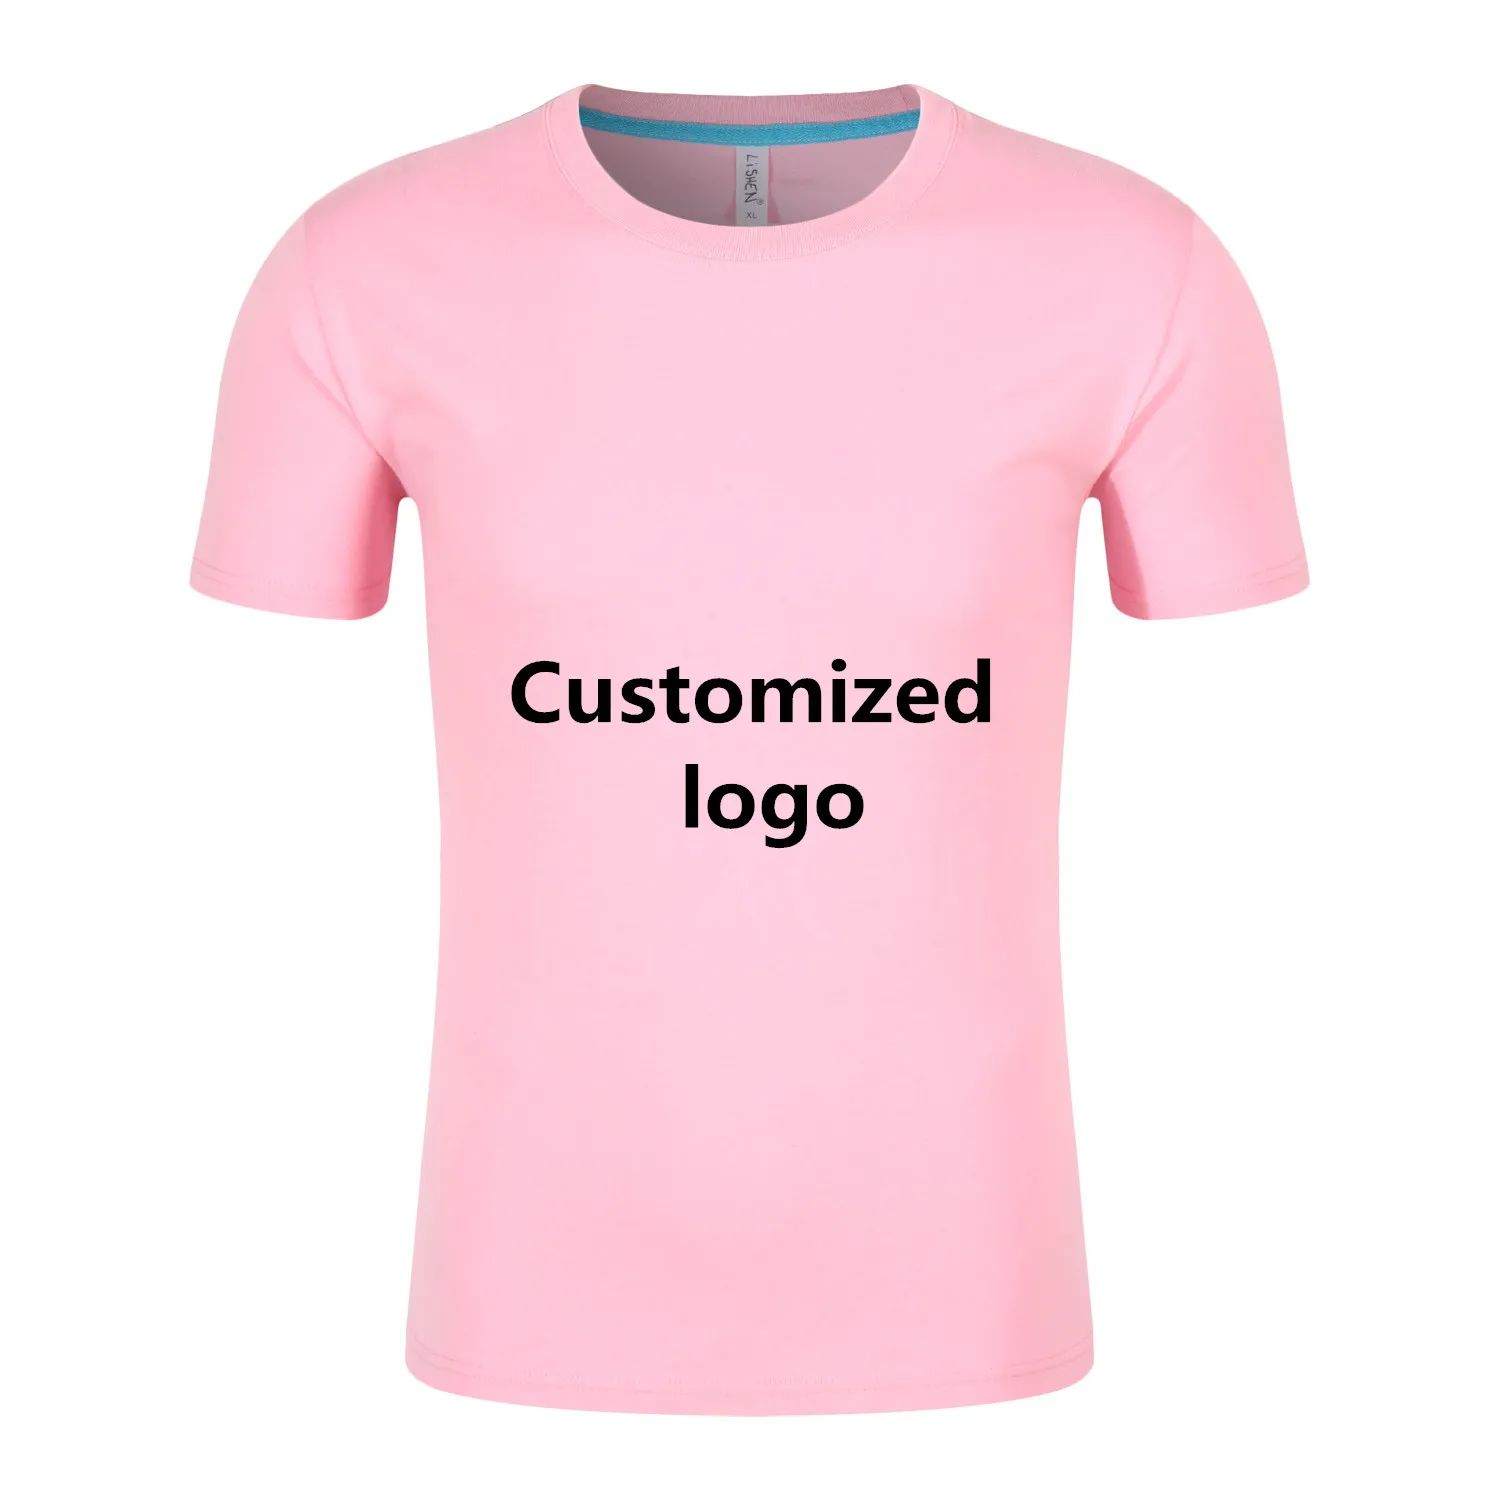 220g pure cotton cultural advertising shirt customized T-shirt work clothing customized quick drying round neck short sleeved printed logo